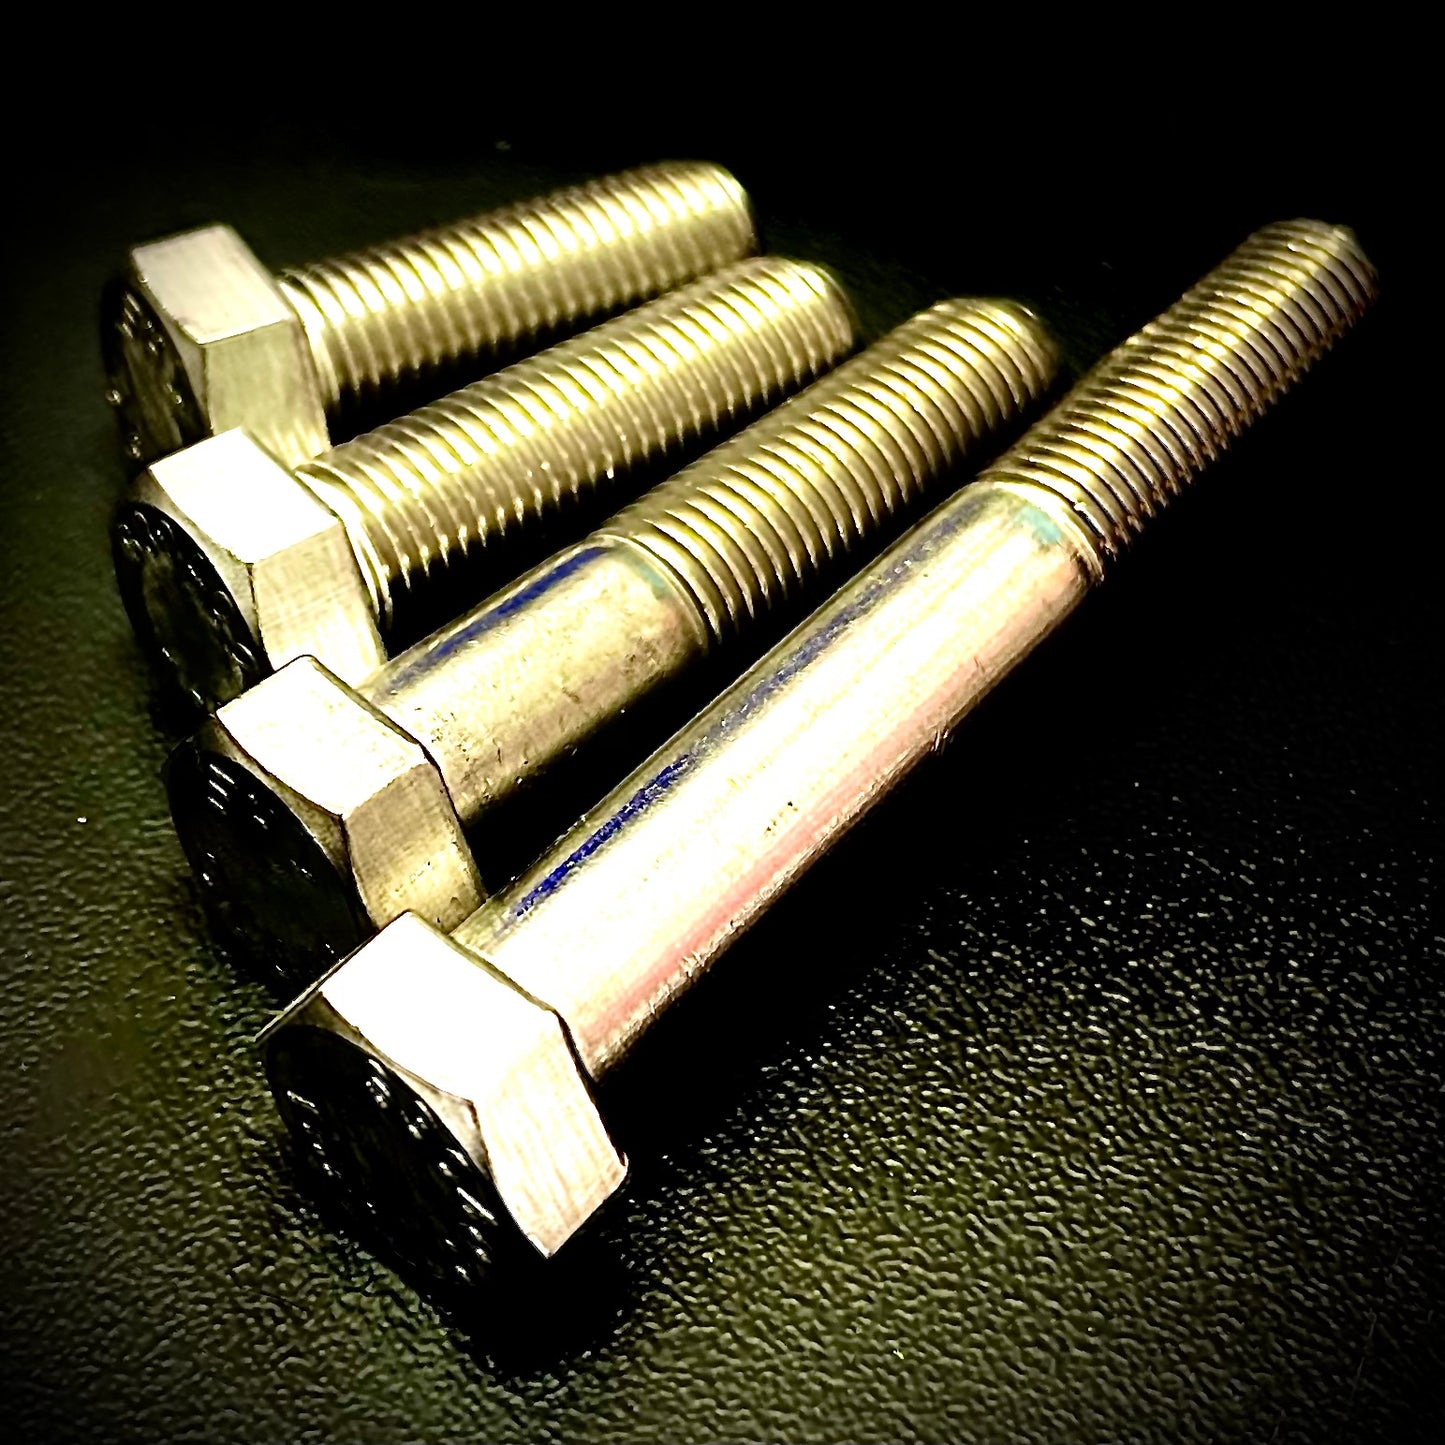 UNF 1/2" Hex Bolt and Hex Set Screw A2 304 Stainless Steel DIN931 - Fixaball Ltd. Fixings and Fasteners UK